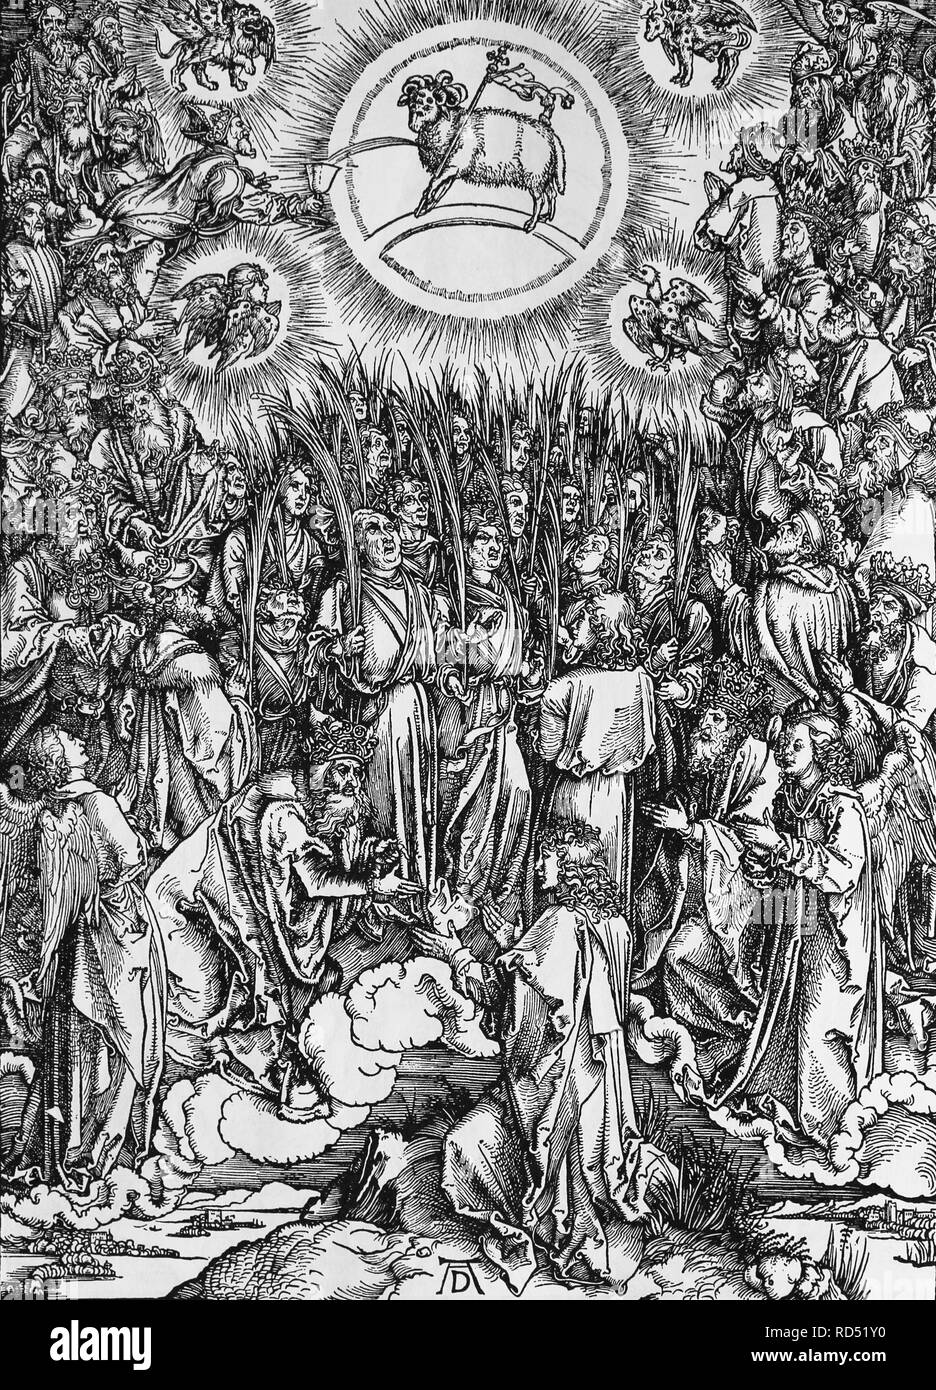 The hymn in adoration of the lamb. Apocalypse. Woodcut by Albrecht Durer. 1498. Stock Photo